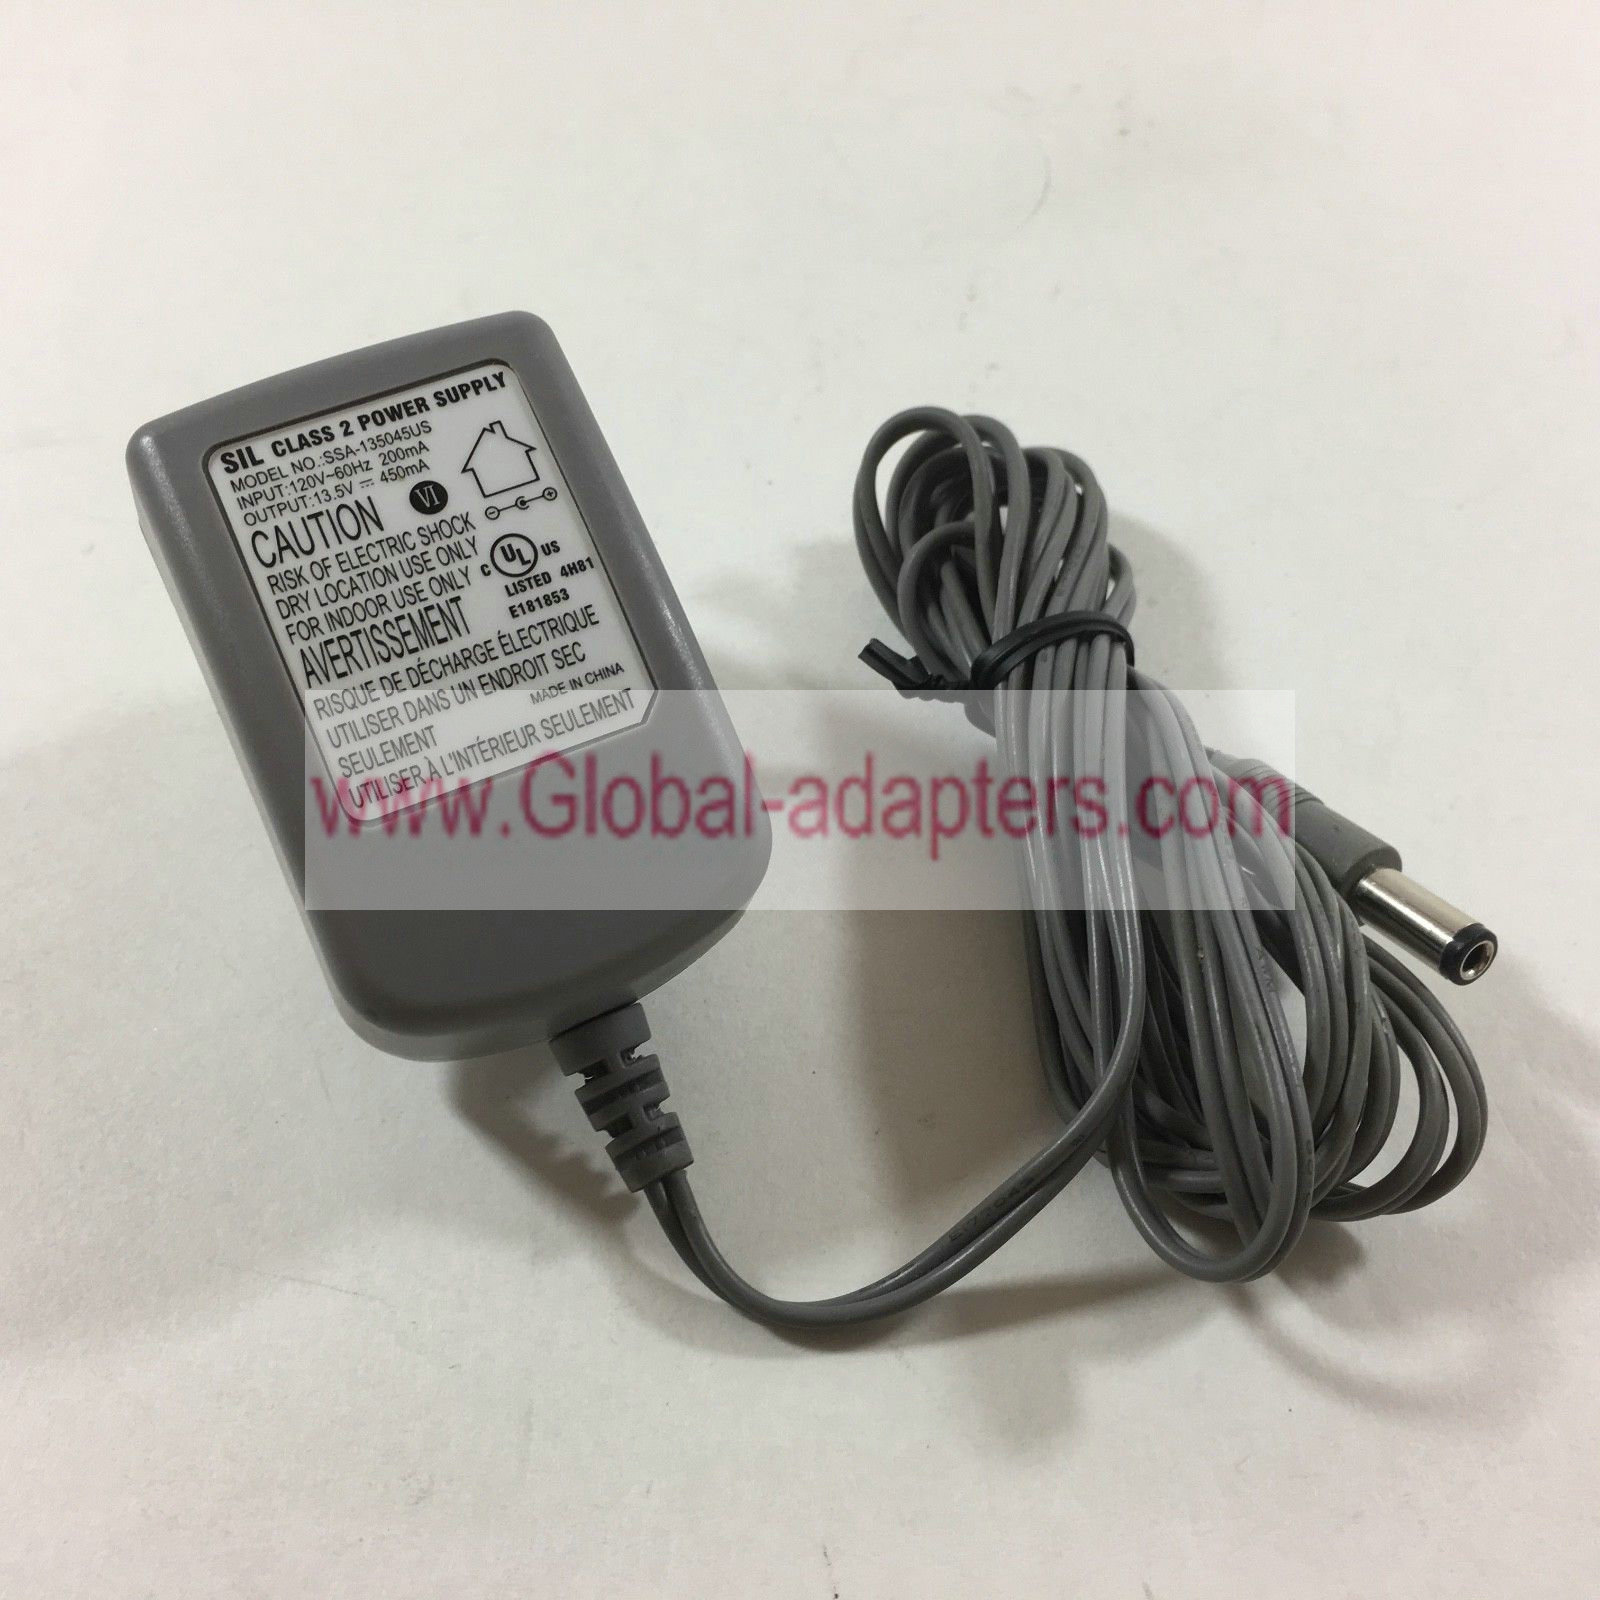 Brand New SIL SSA-135045US DC 13.5V DC 450mA CLASS 2 POWER SUPPLY FOR ELECTROLUX - Click Image to Close